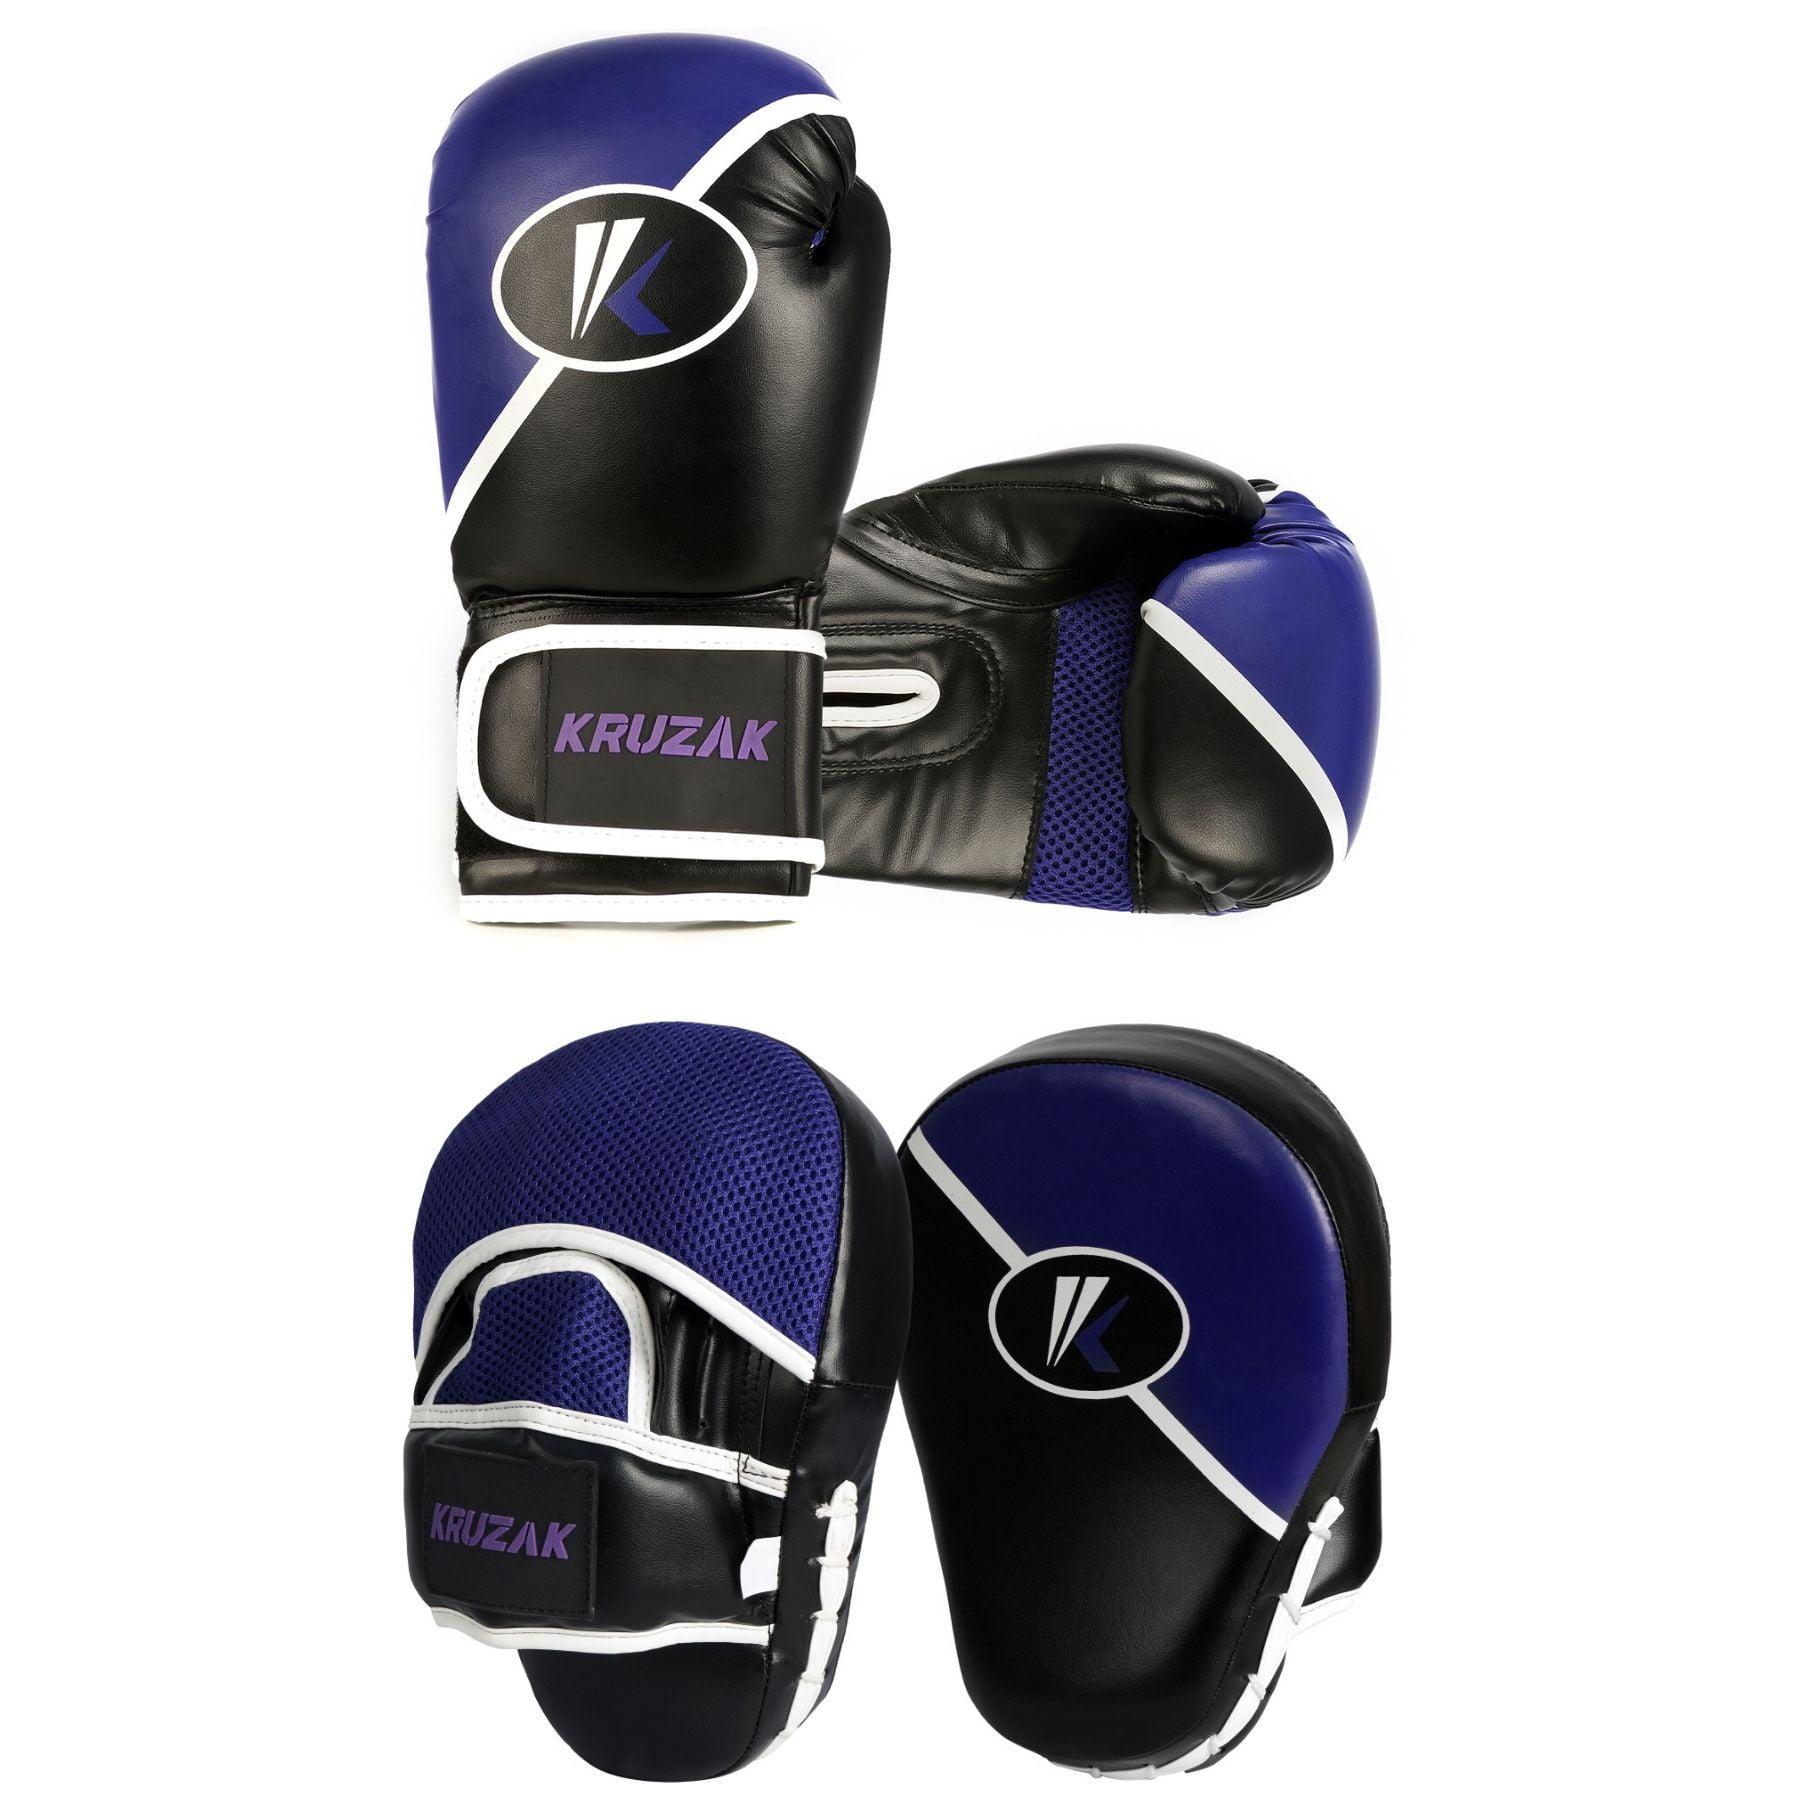 Kruzak Two Tone Punching Mitts for Muay Thai MMA Training Focus Pads for Boxing Martial Arts and Punching Target 